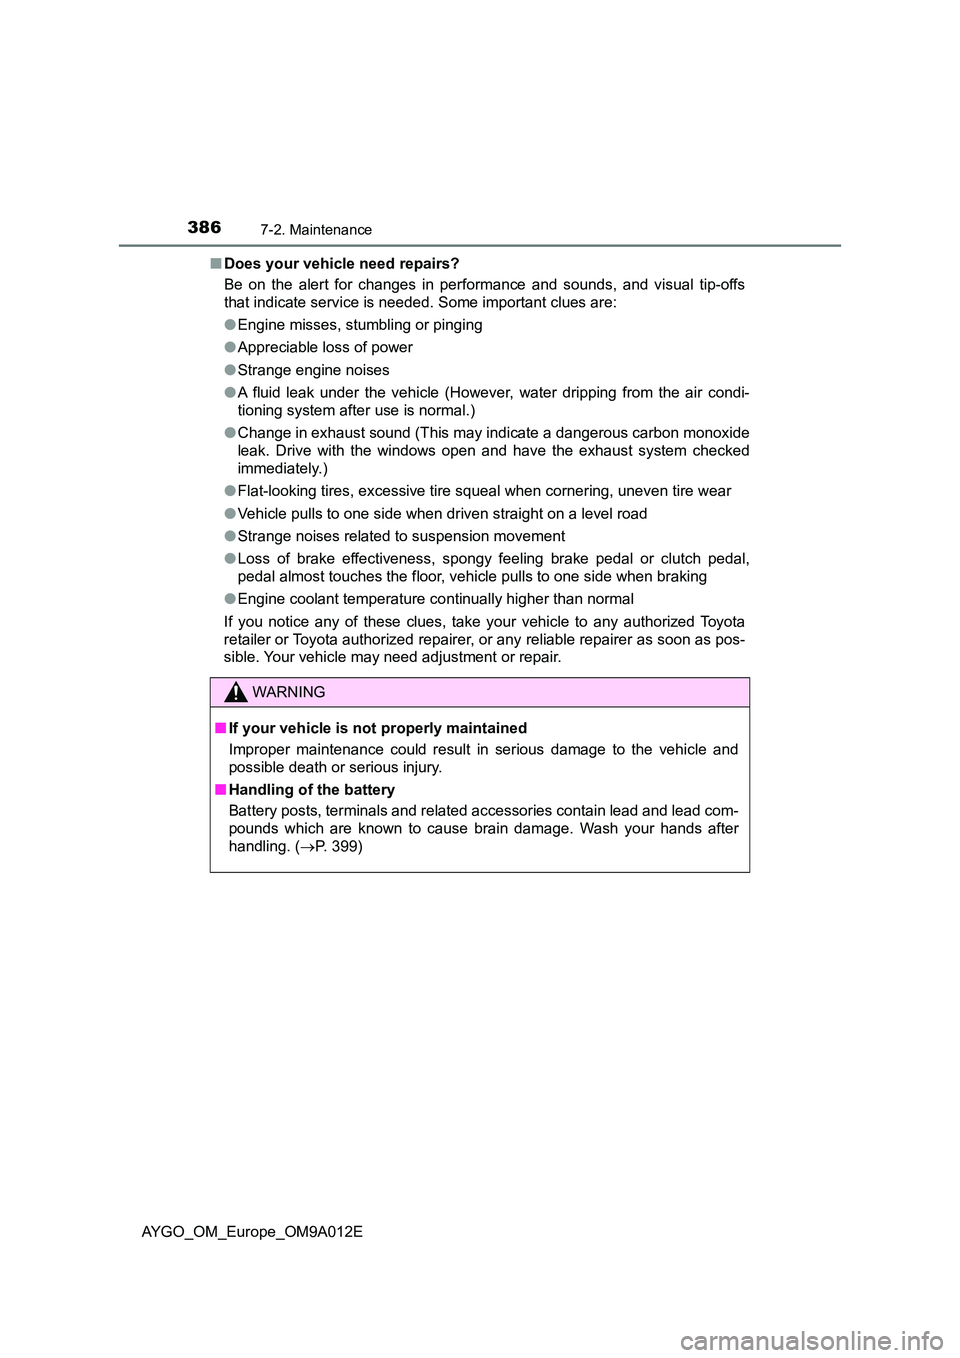 TOYOTA AYGO 2021  Owners Manual 3867-2. Maintenance
AYGO_OM_Europe_OM9A012E 
■ Does your vehicle need repairs? 
Be on the alert for changes in performance and sounds, and visual tip-offs 
that indicate service is needed. Some impo